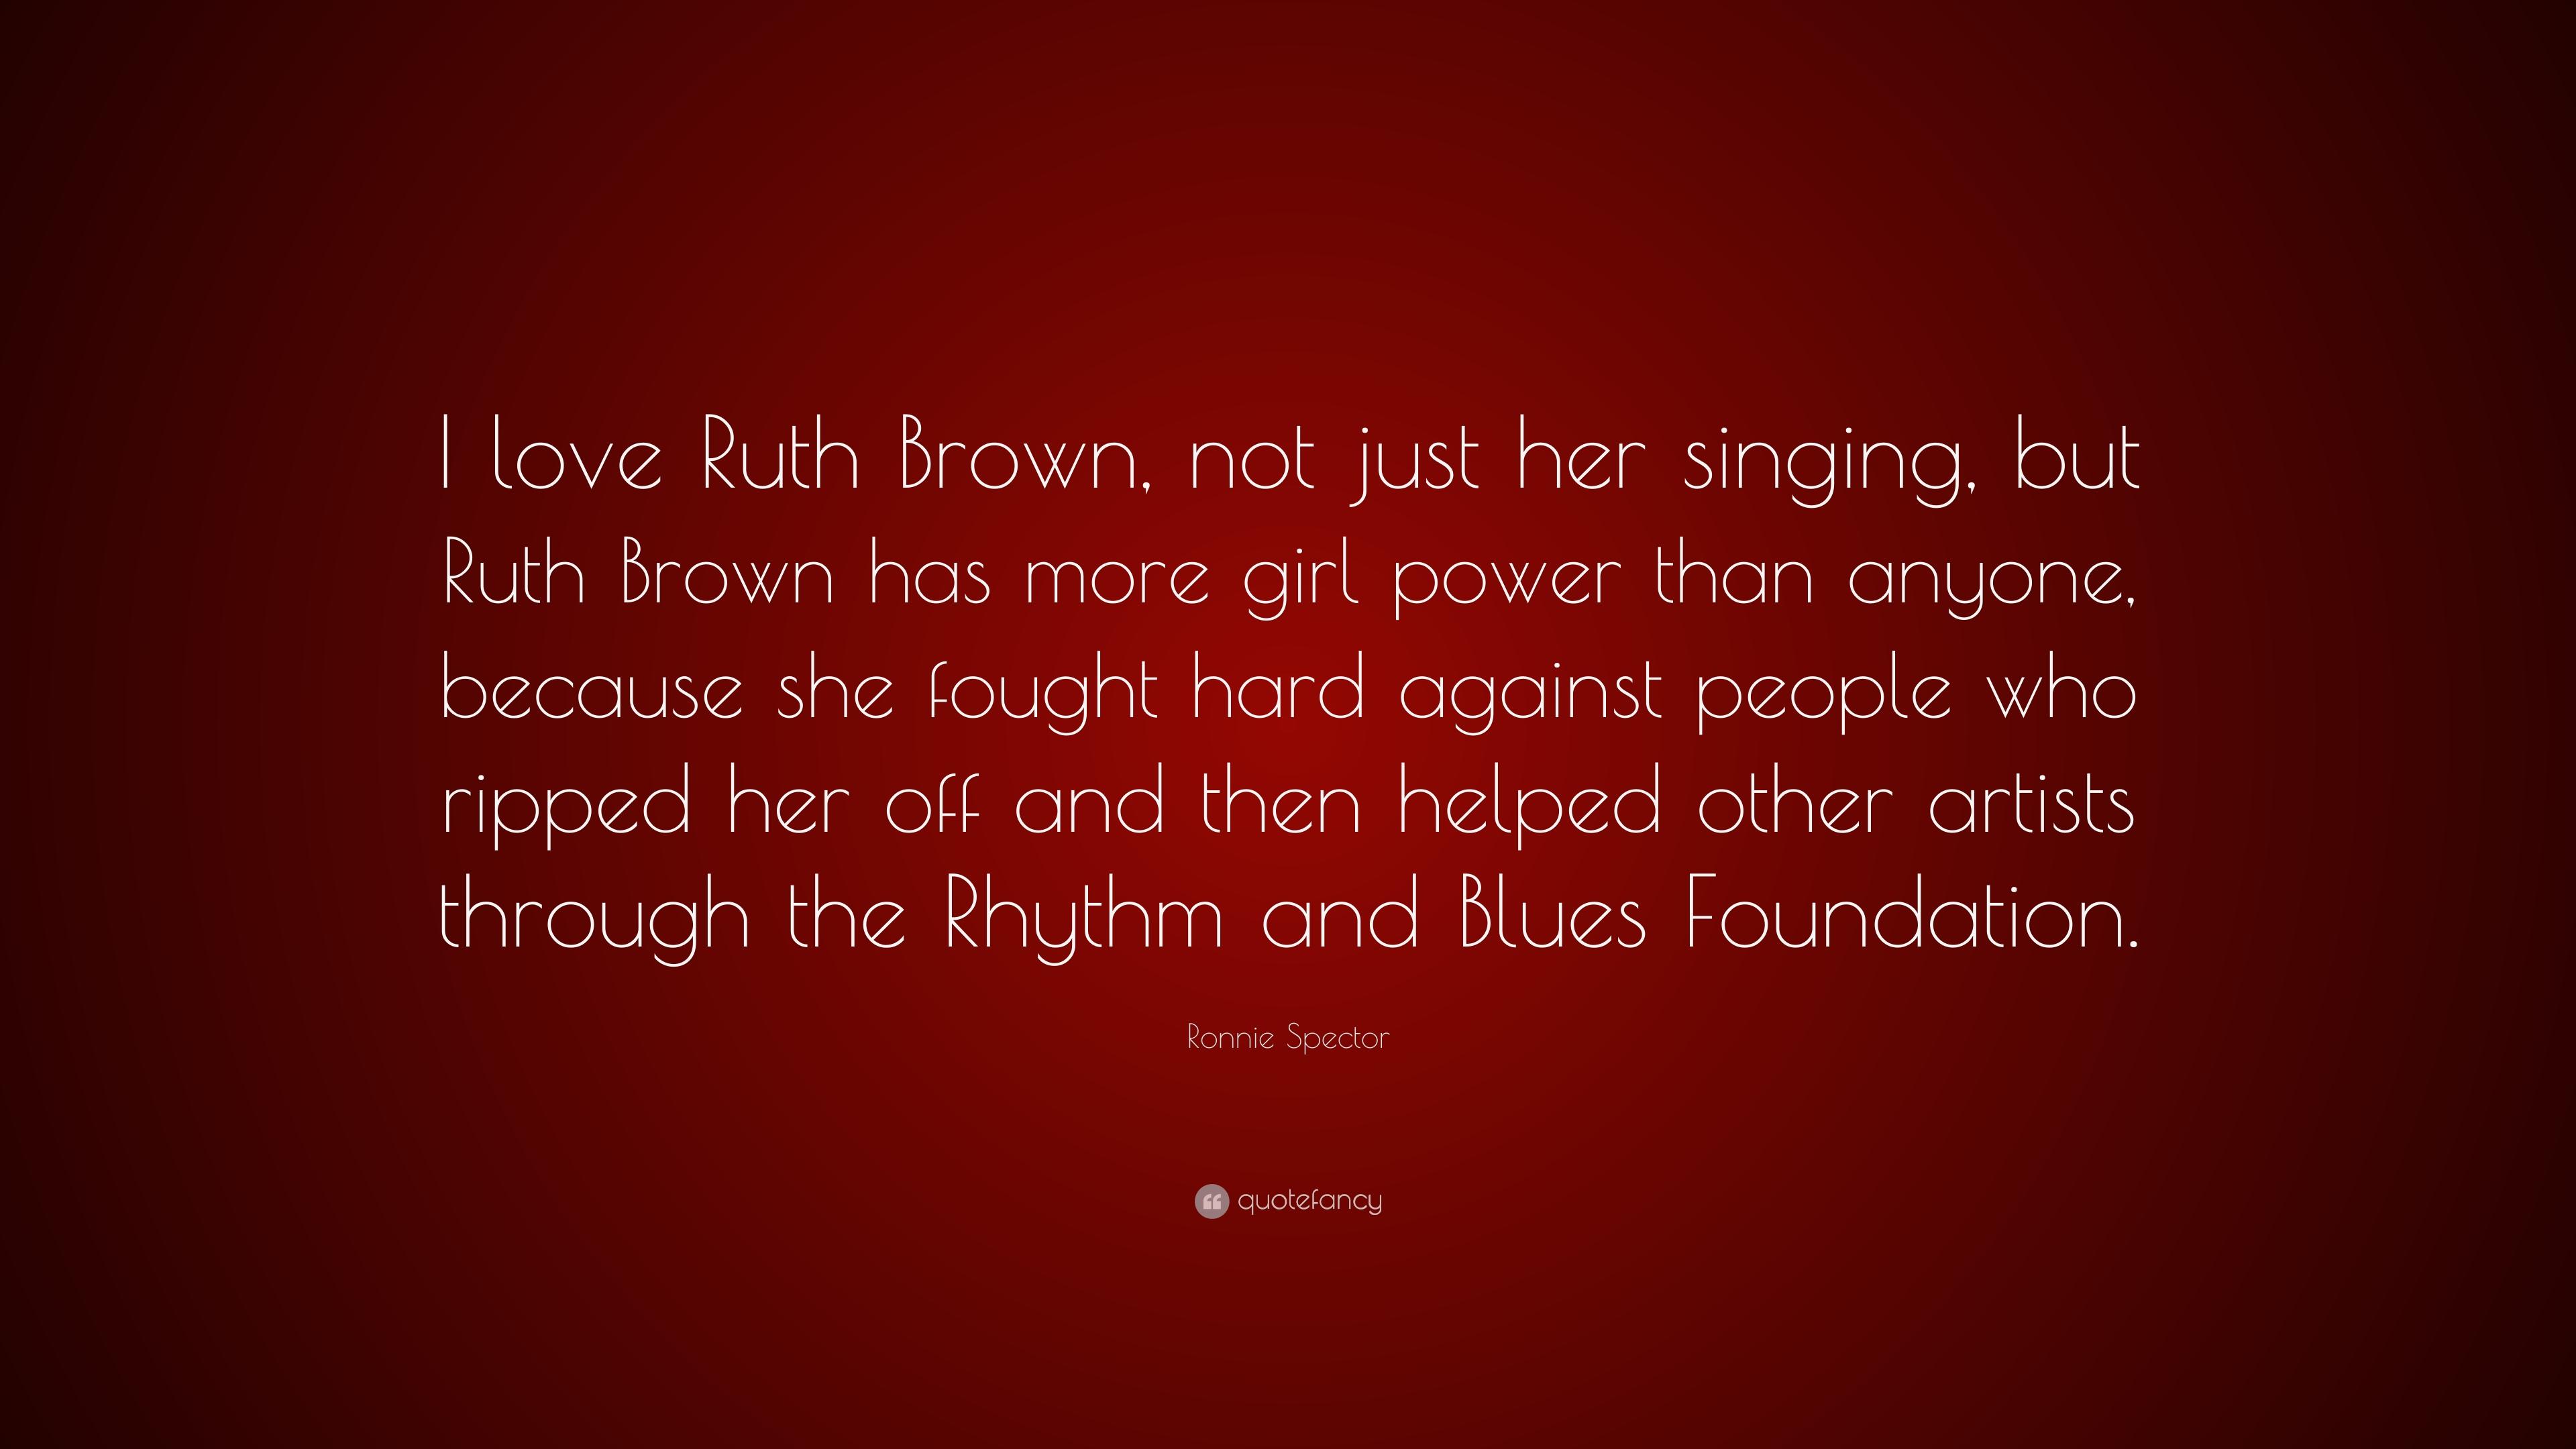 Ronnie Spector Quote: “I love Ruth Brown, not just her singing, but